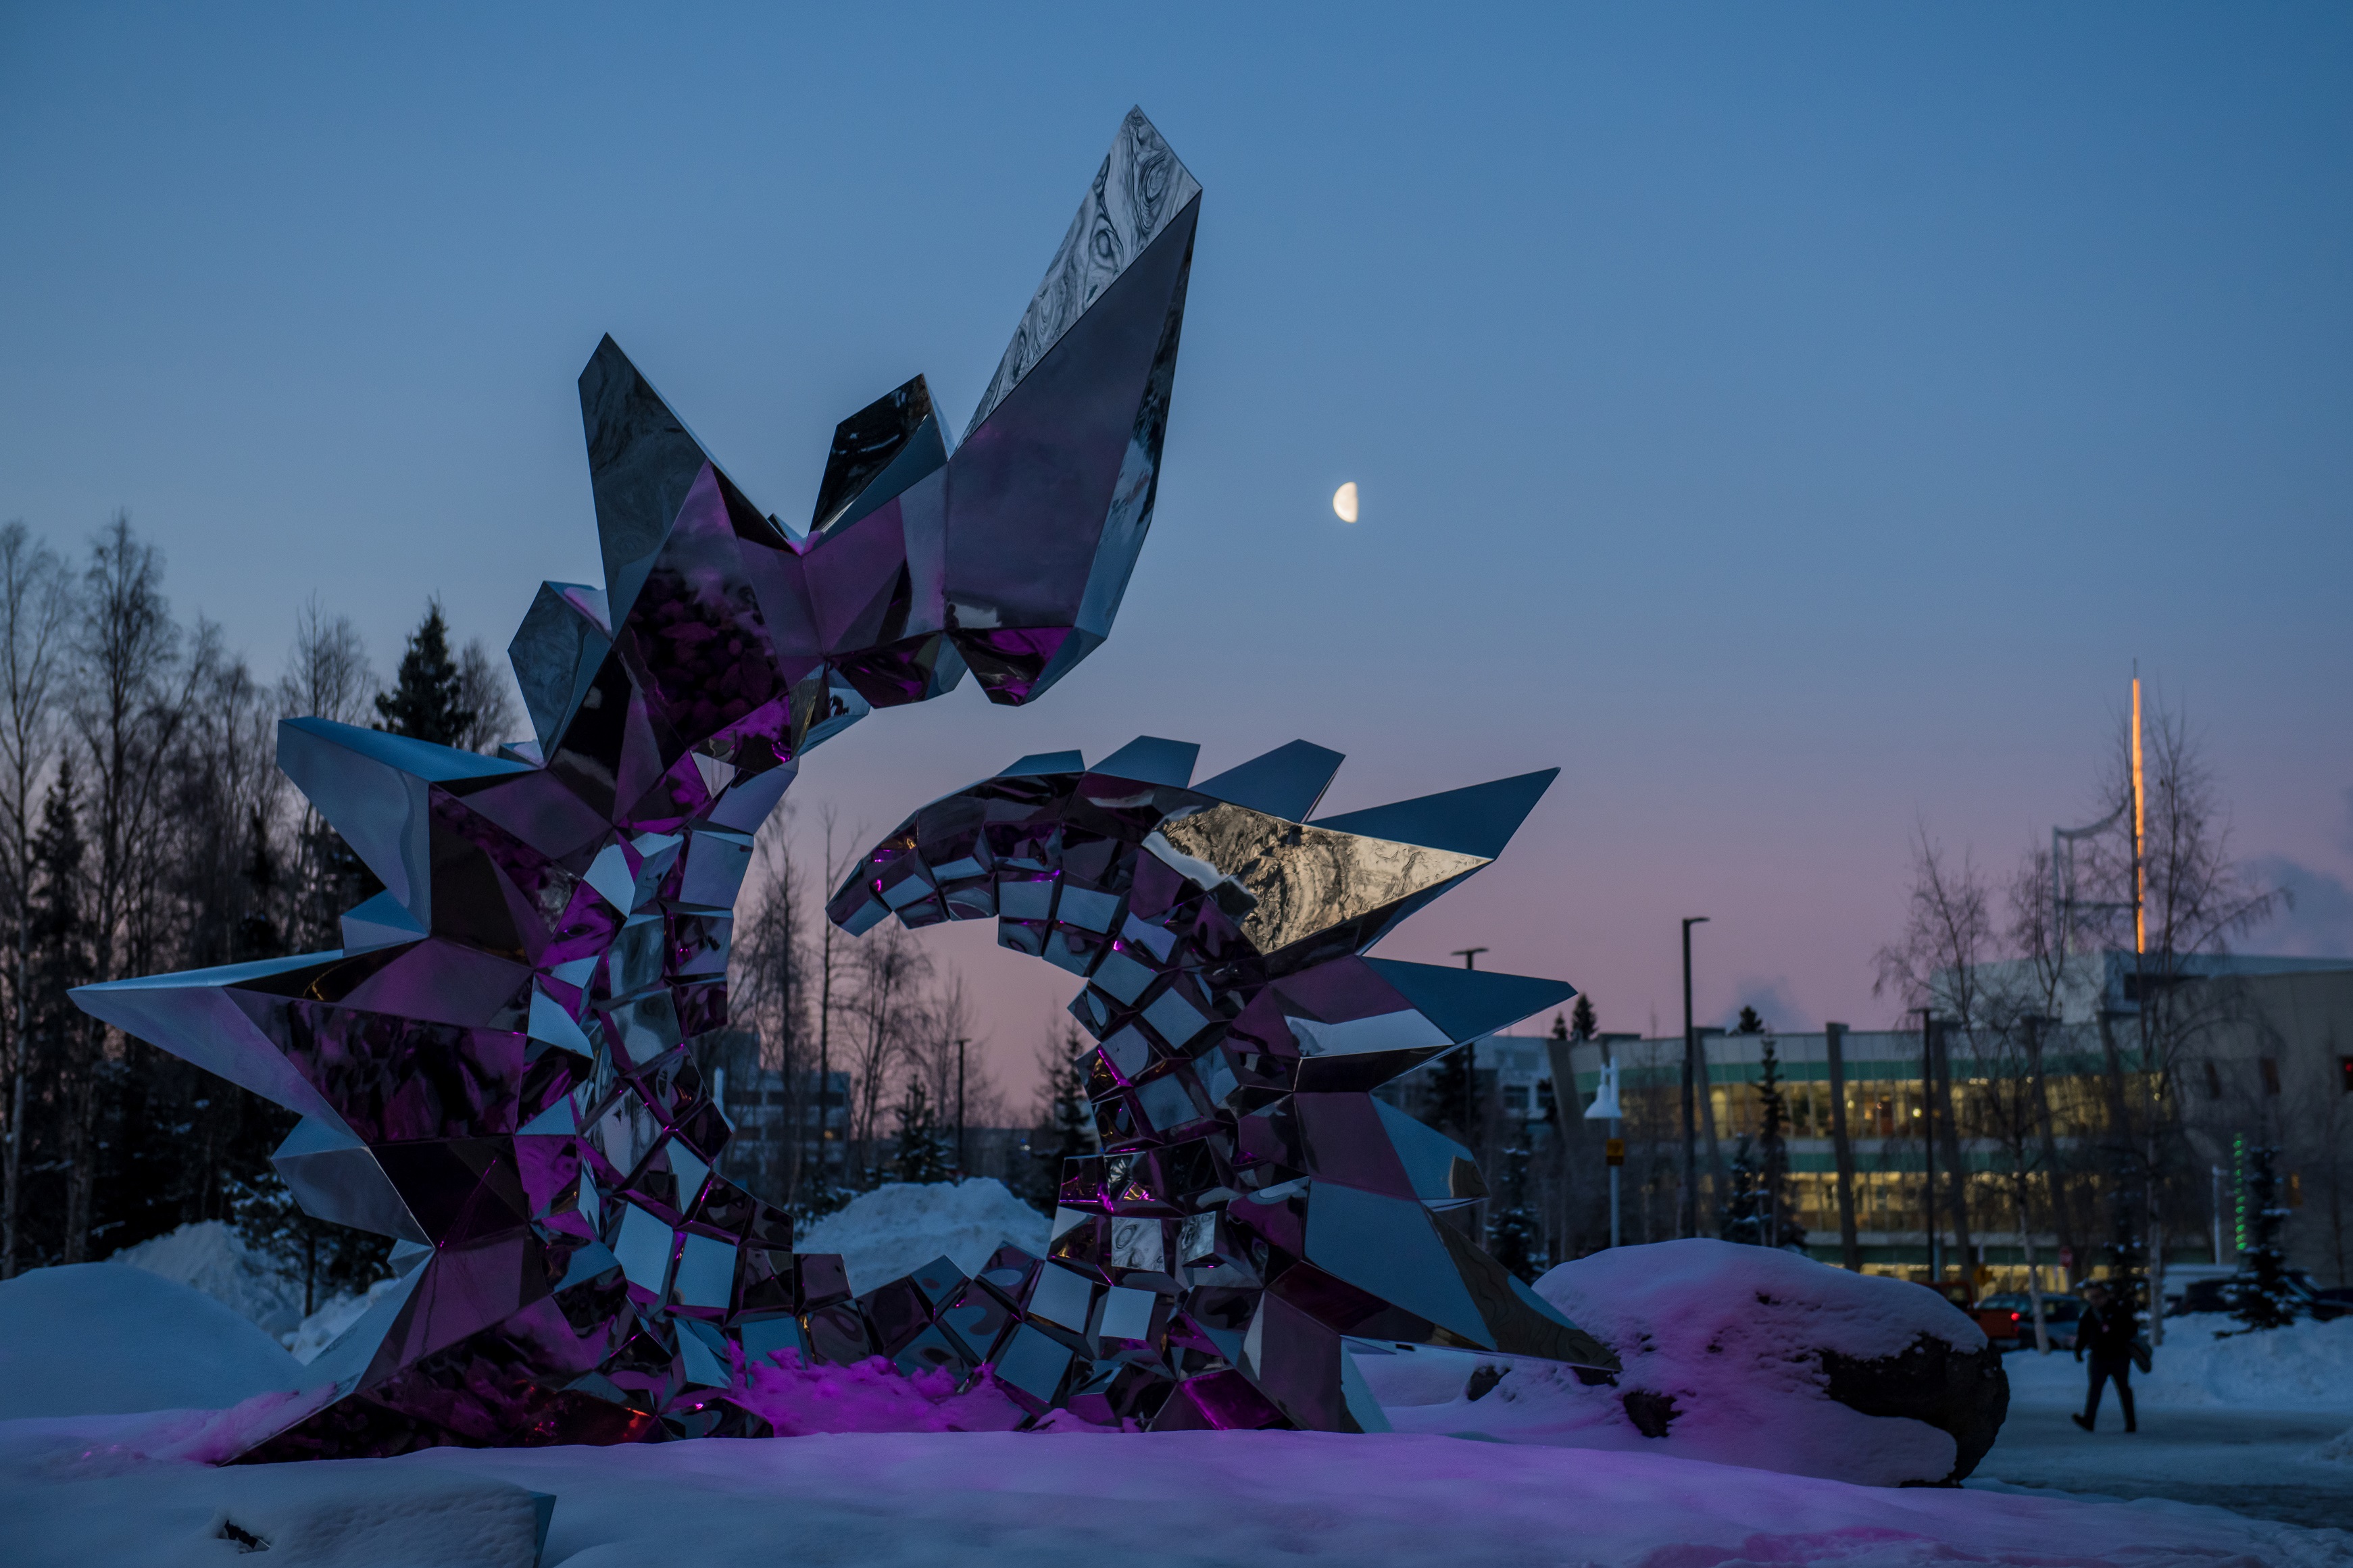 Moon Sculpture Outside the UAA Library at Dusk